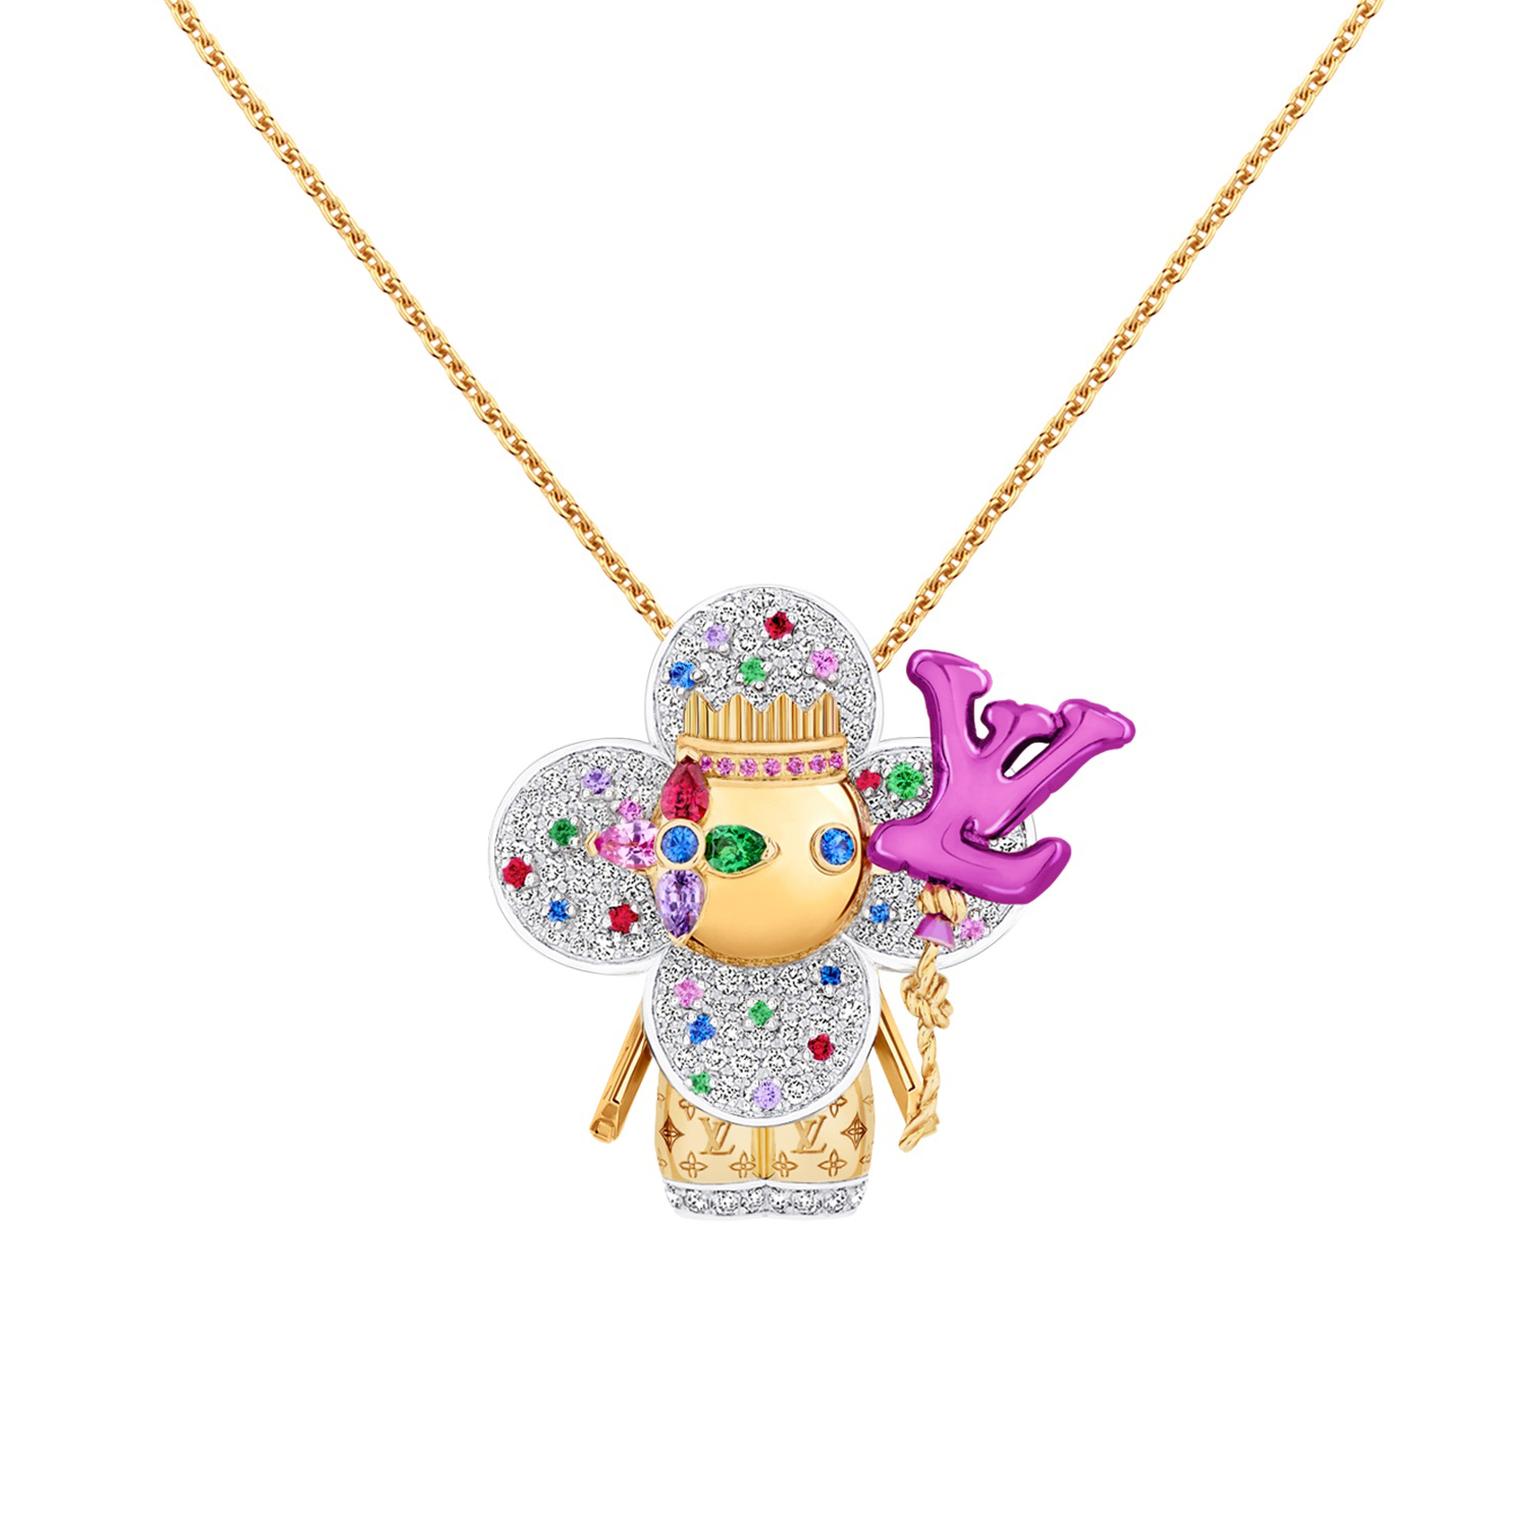 The low-down on Louis Vuitton's Vivienne doll jewels.